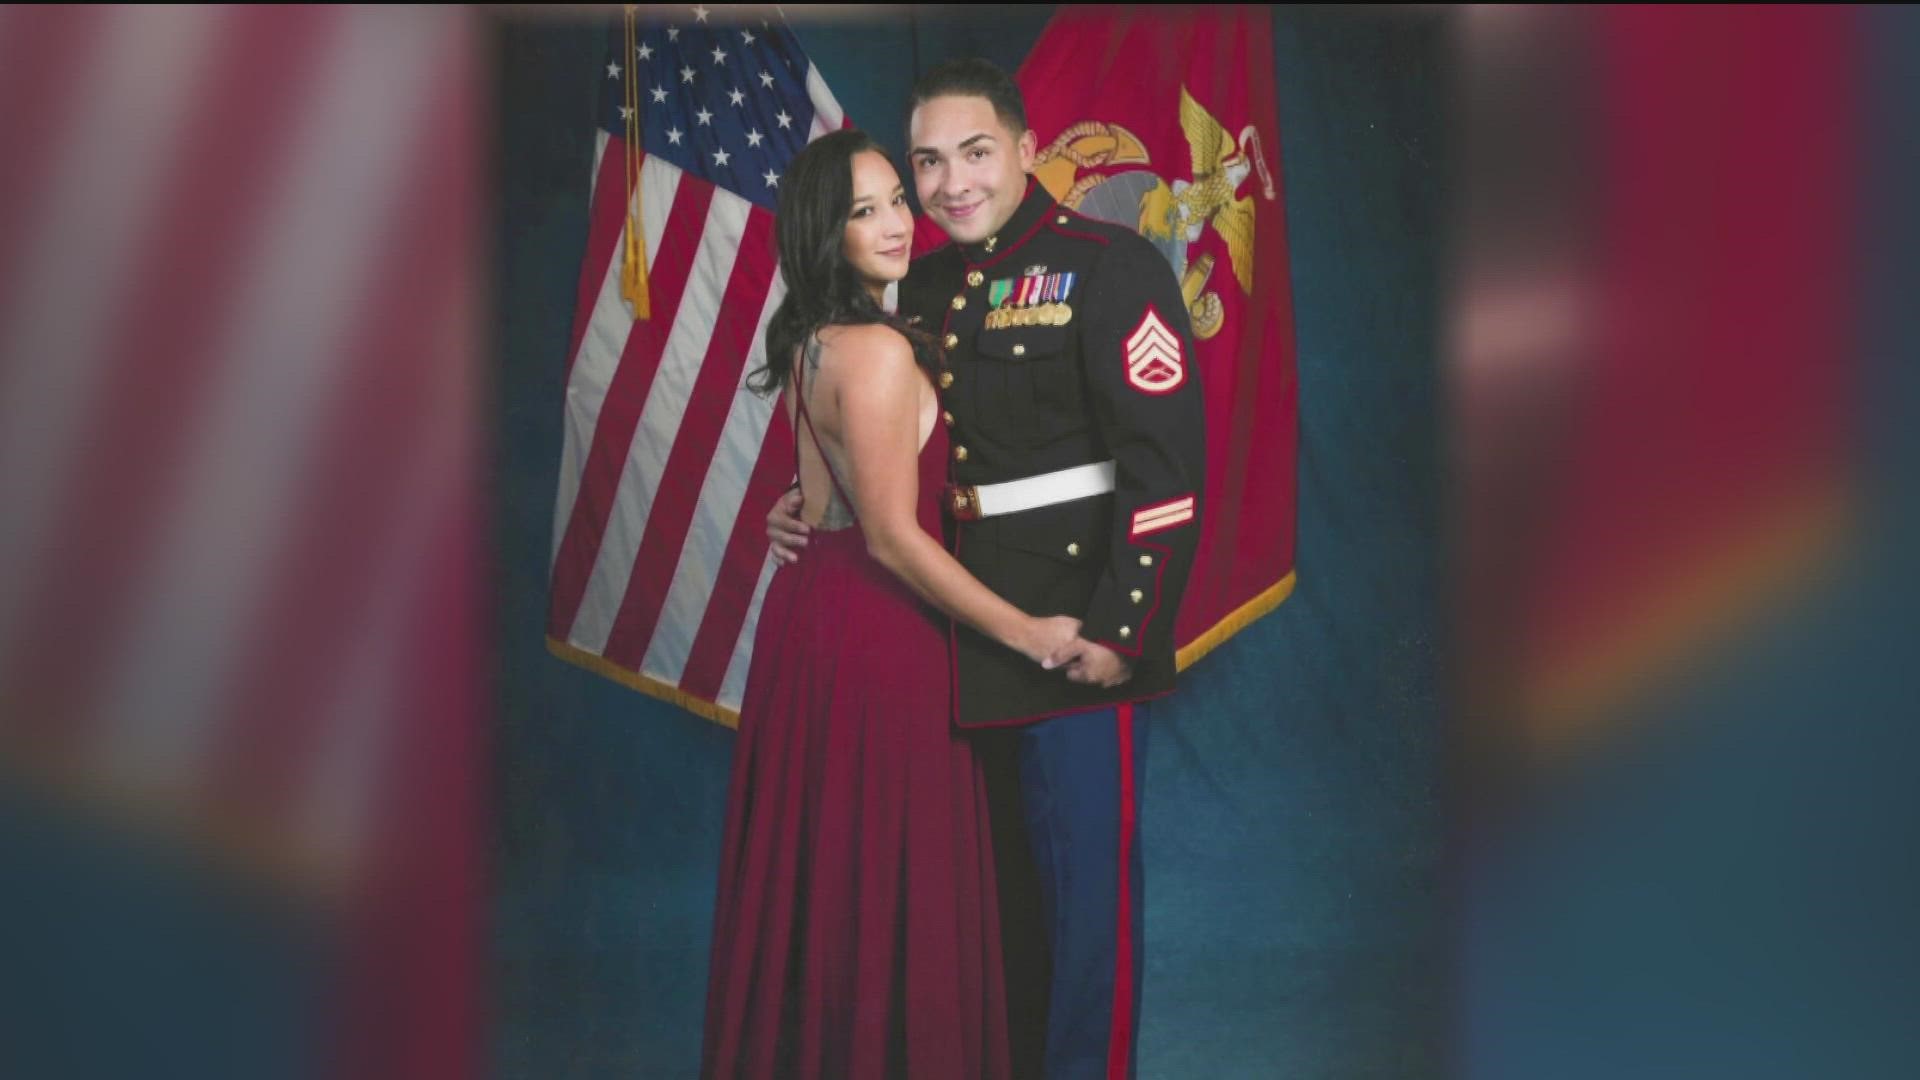 The Bahena’s are two military veterans who are married with three children, who will both be graduating San Diego State together after a decade of taking classes.